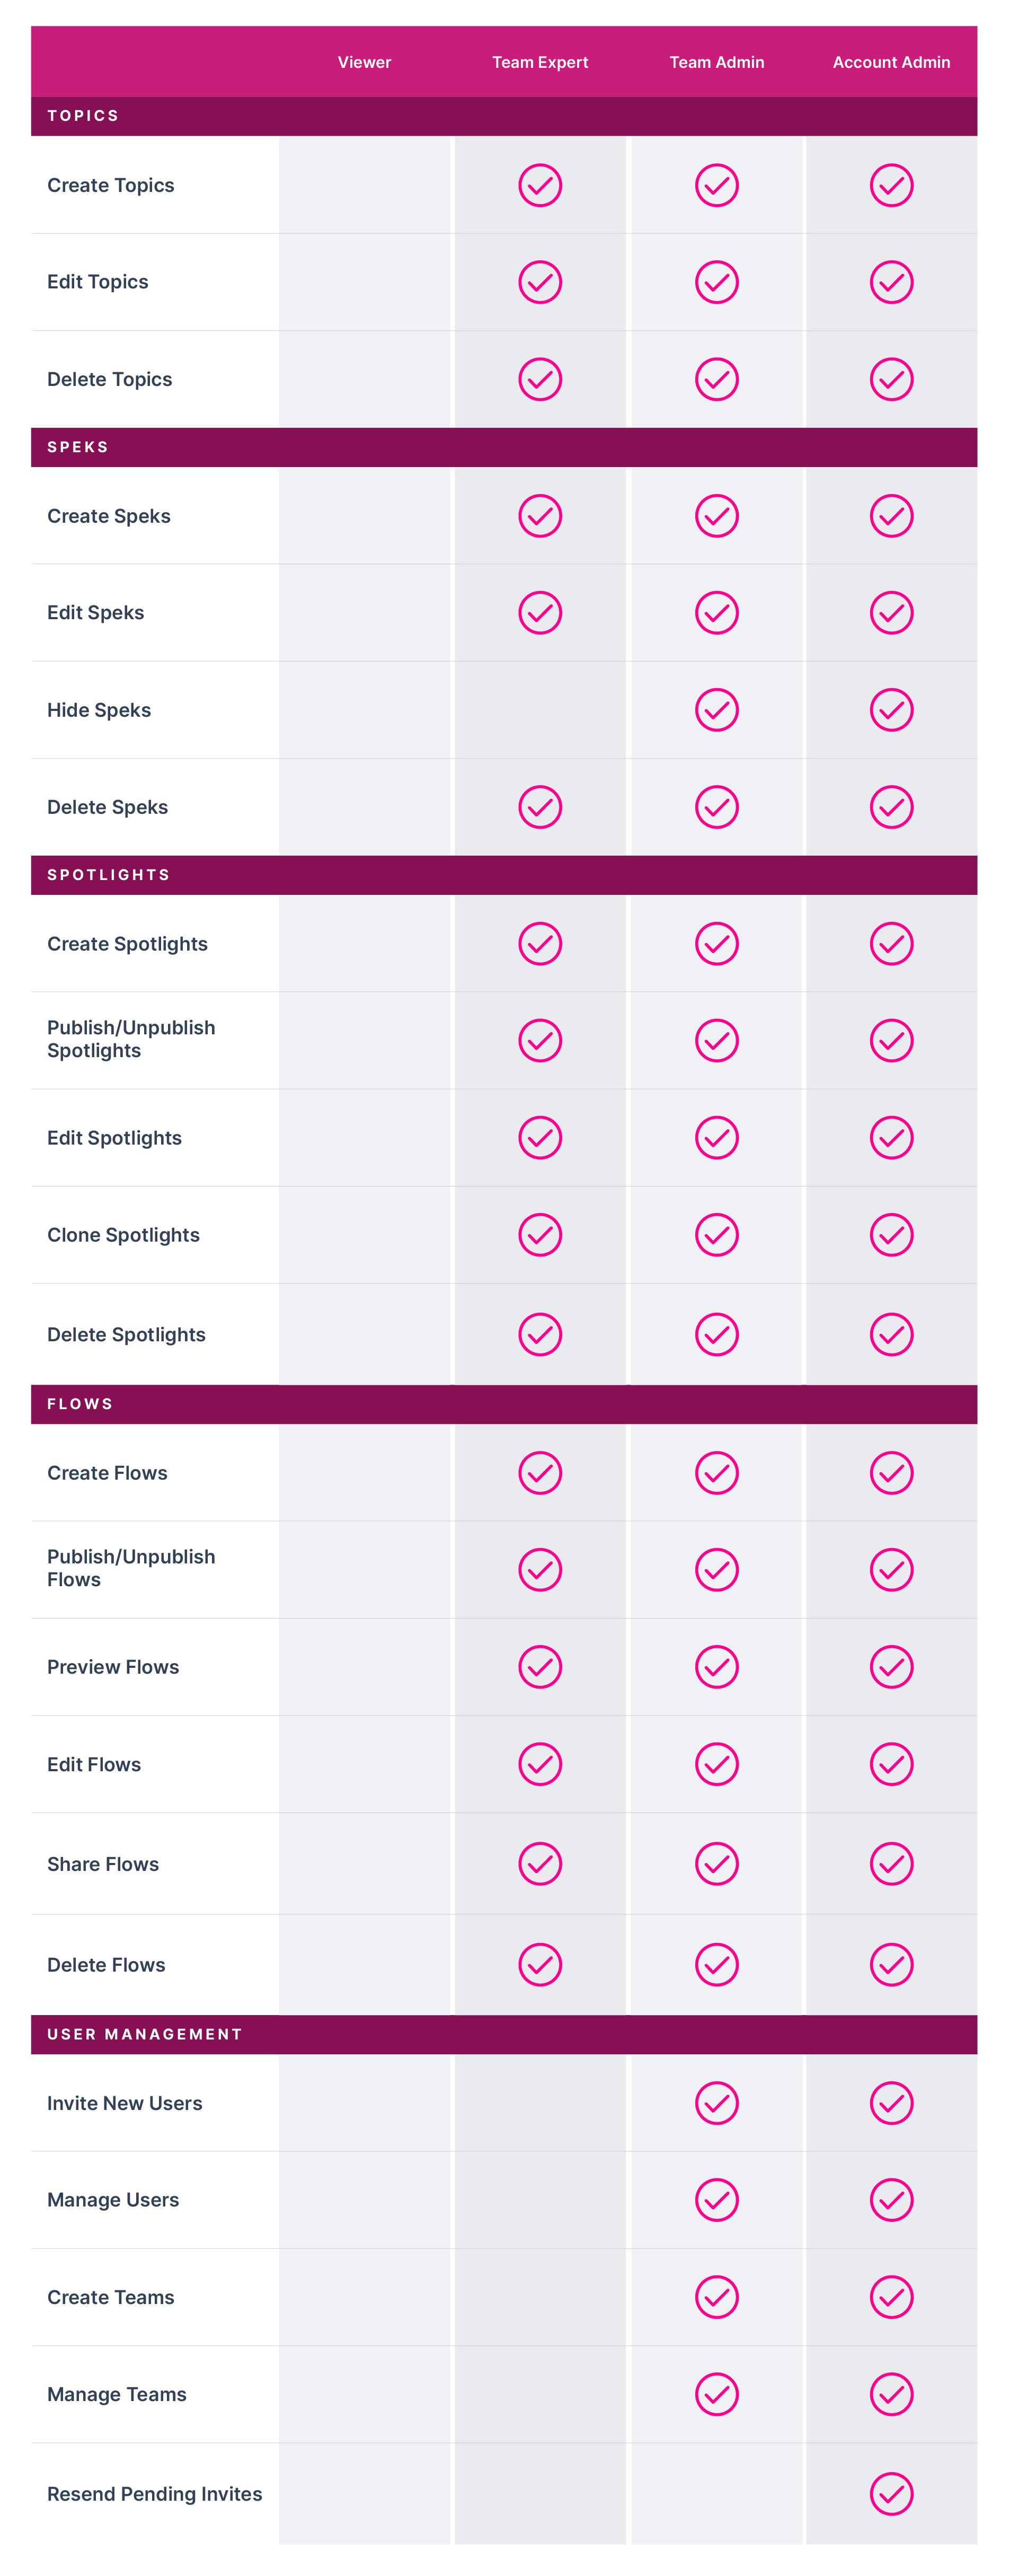 user-permissions-table-topics-speks-spotlights-flows-and-user-management-pink.png